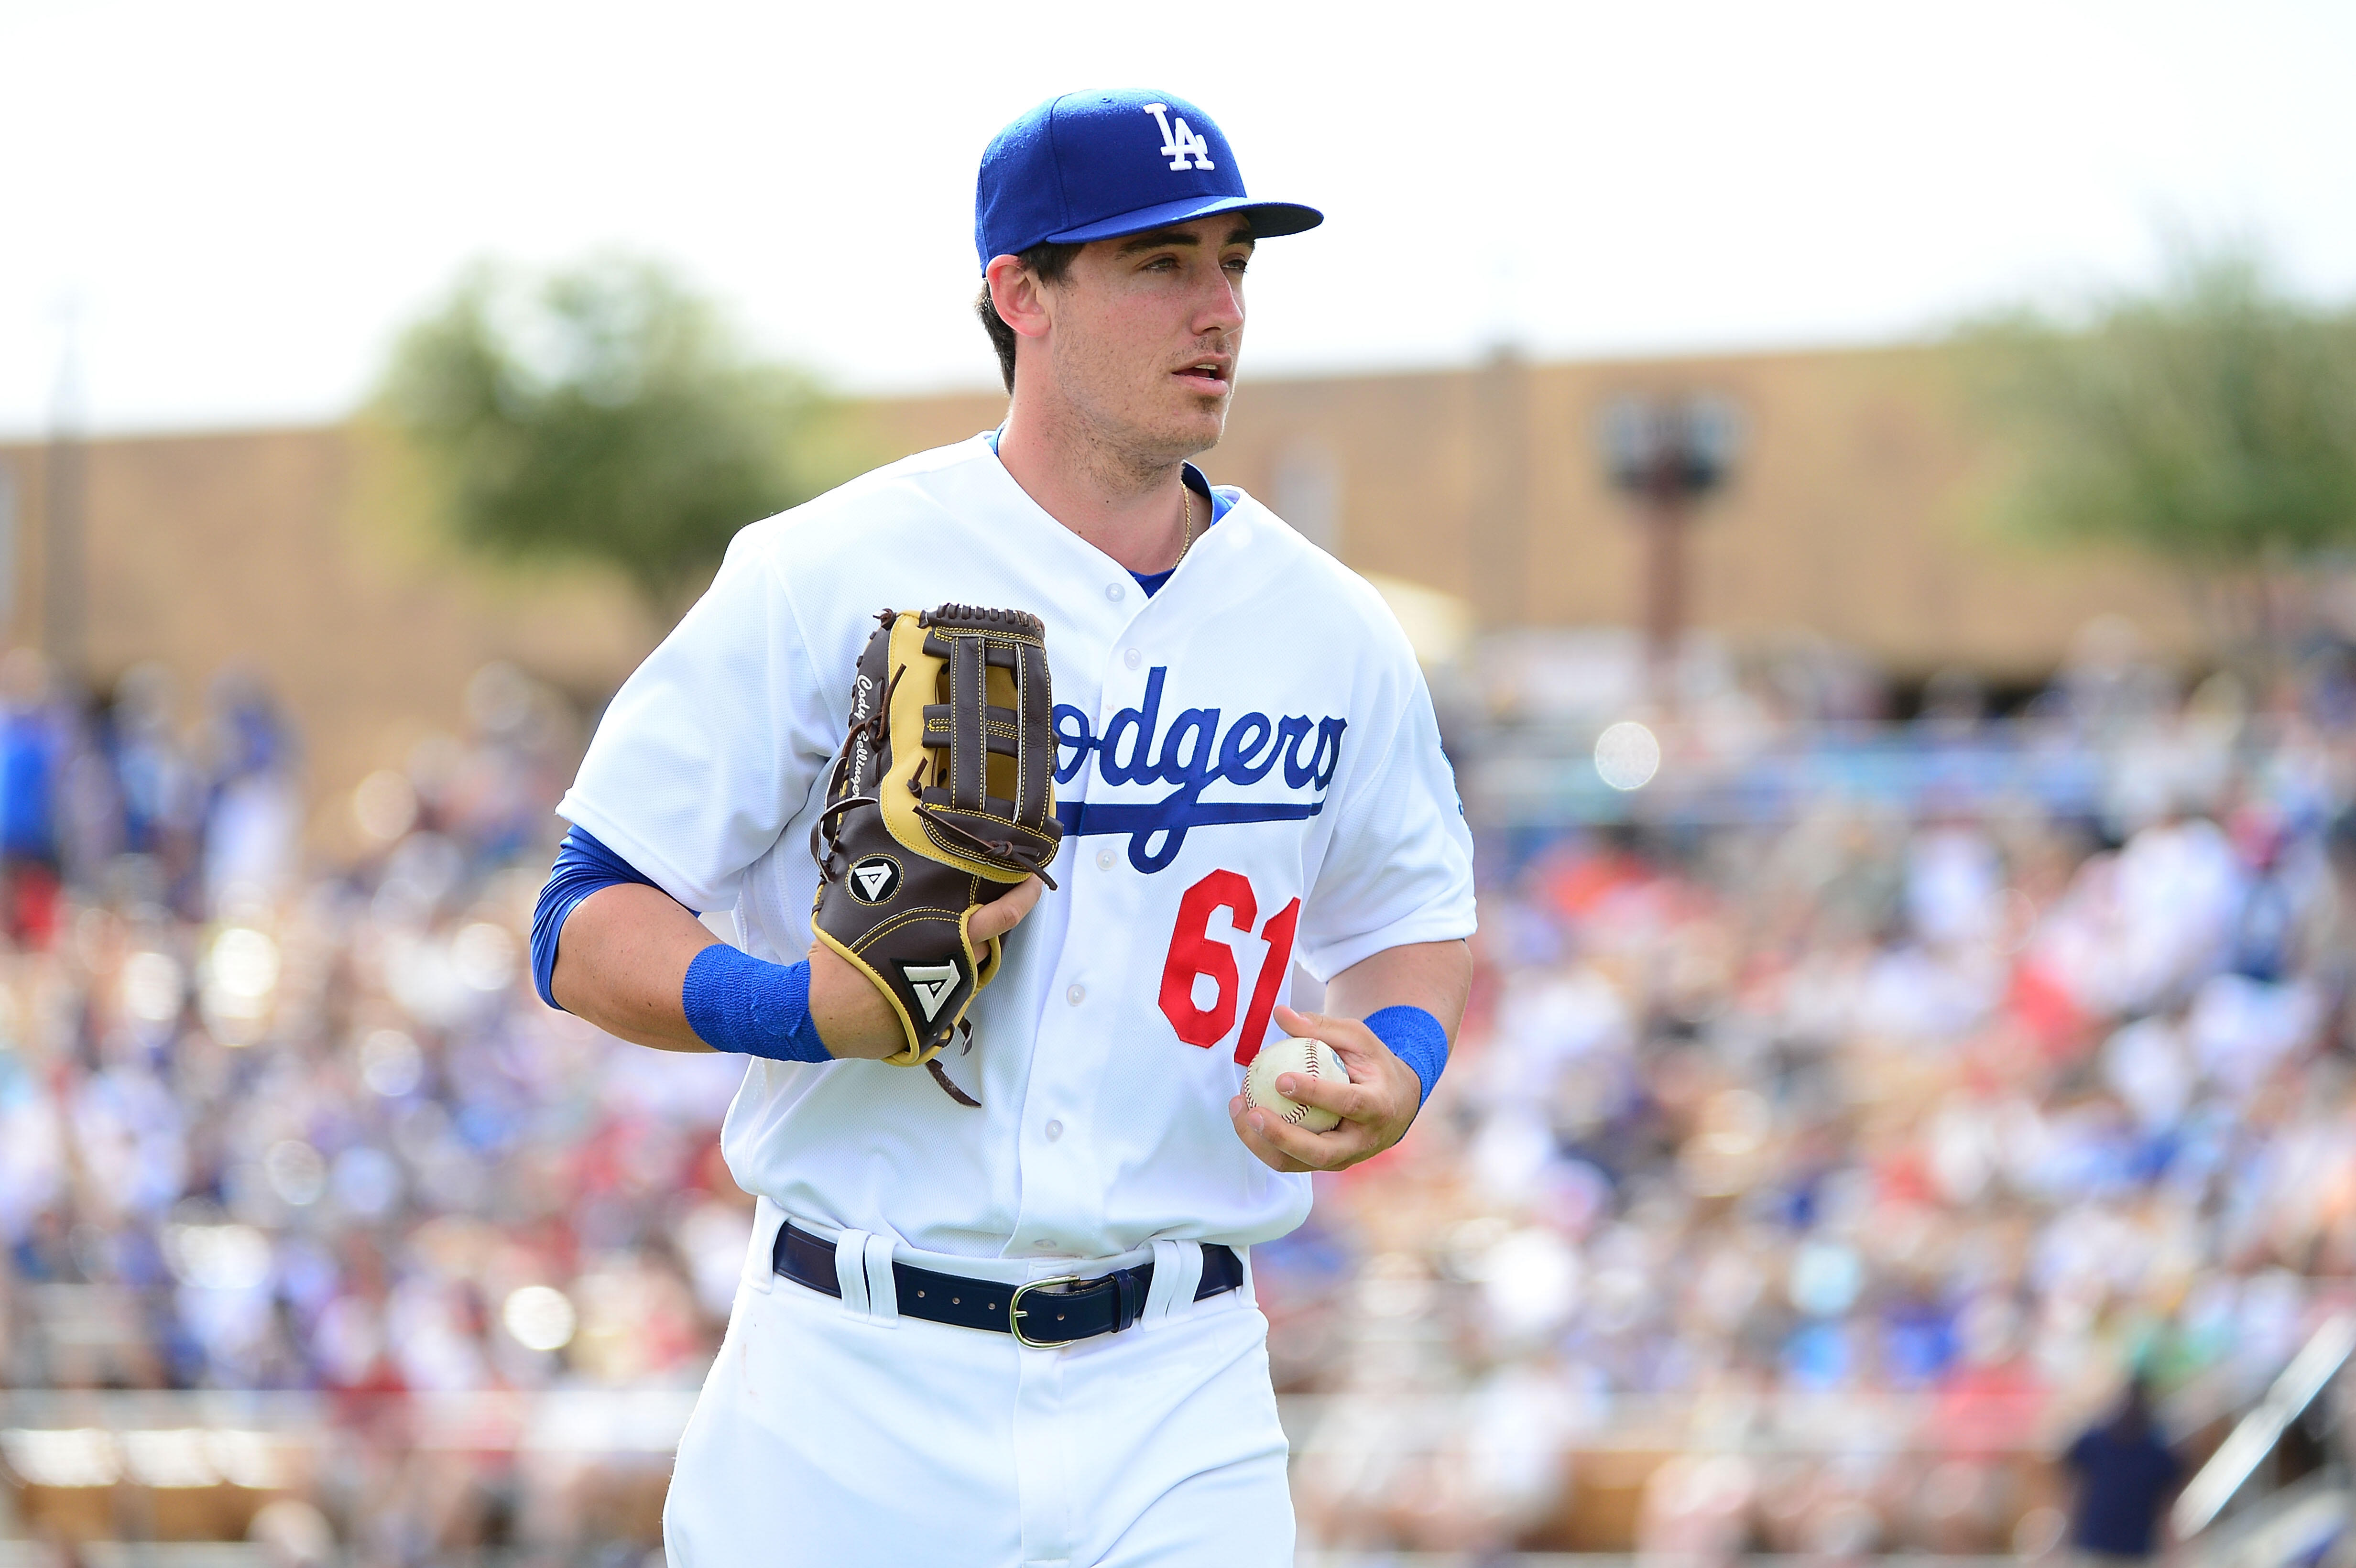 GLENDALE, AZ - MARCH 05:  Cody Bellinger #61 of the Los Angeles Dodgers jogs to the dugout during the spring training game at Camelback Ranch on March 5, 2016 in Glendale, Arizona.  The Dodgers won 7-2.  (Photo by Jennifer Stewart/Getty Images)